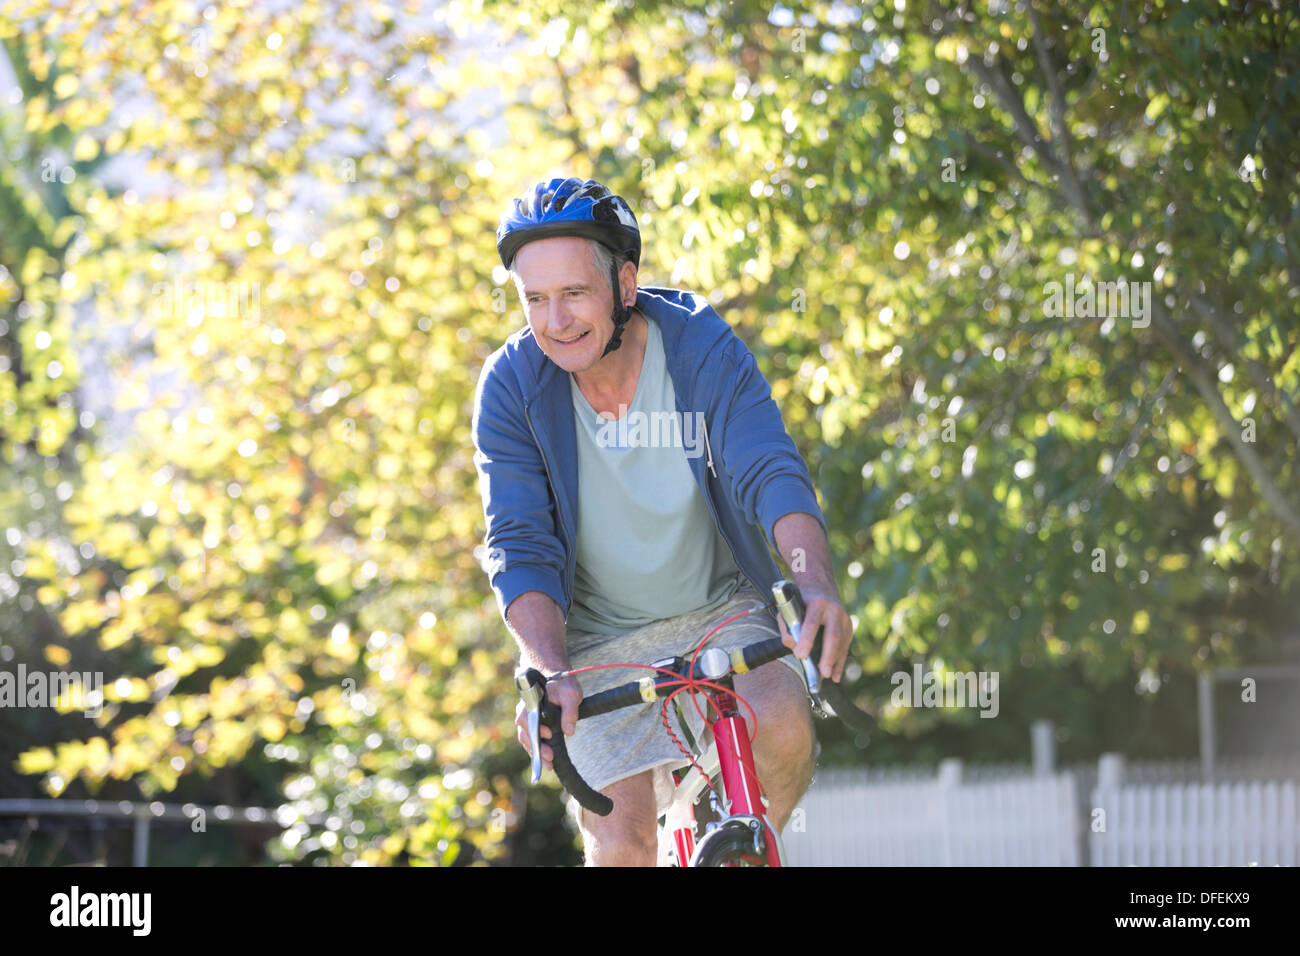 Senior man riding bicycle in park Banque D'Images